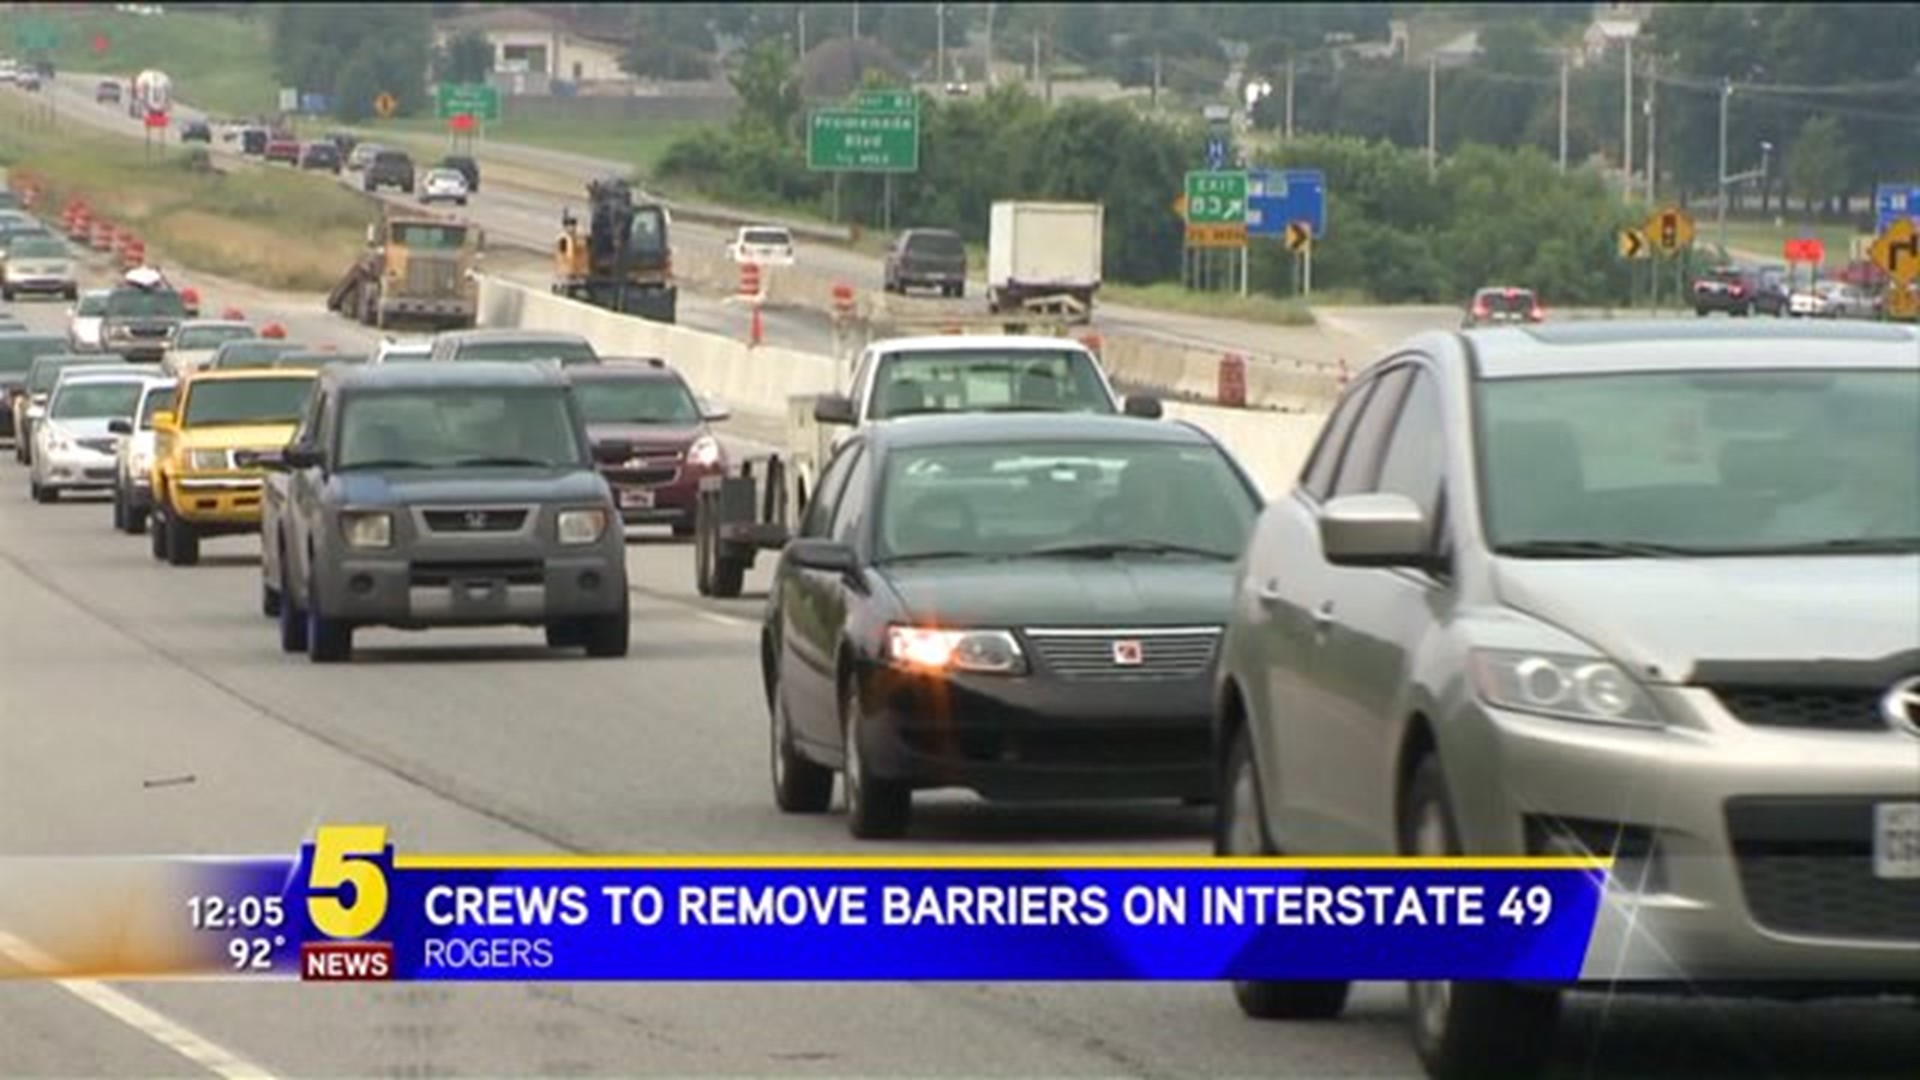 CONSTRUCTION WRAPPING UP ON I-49